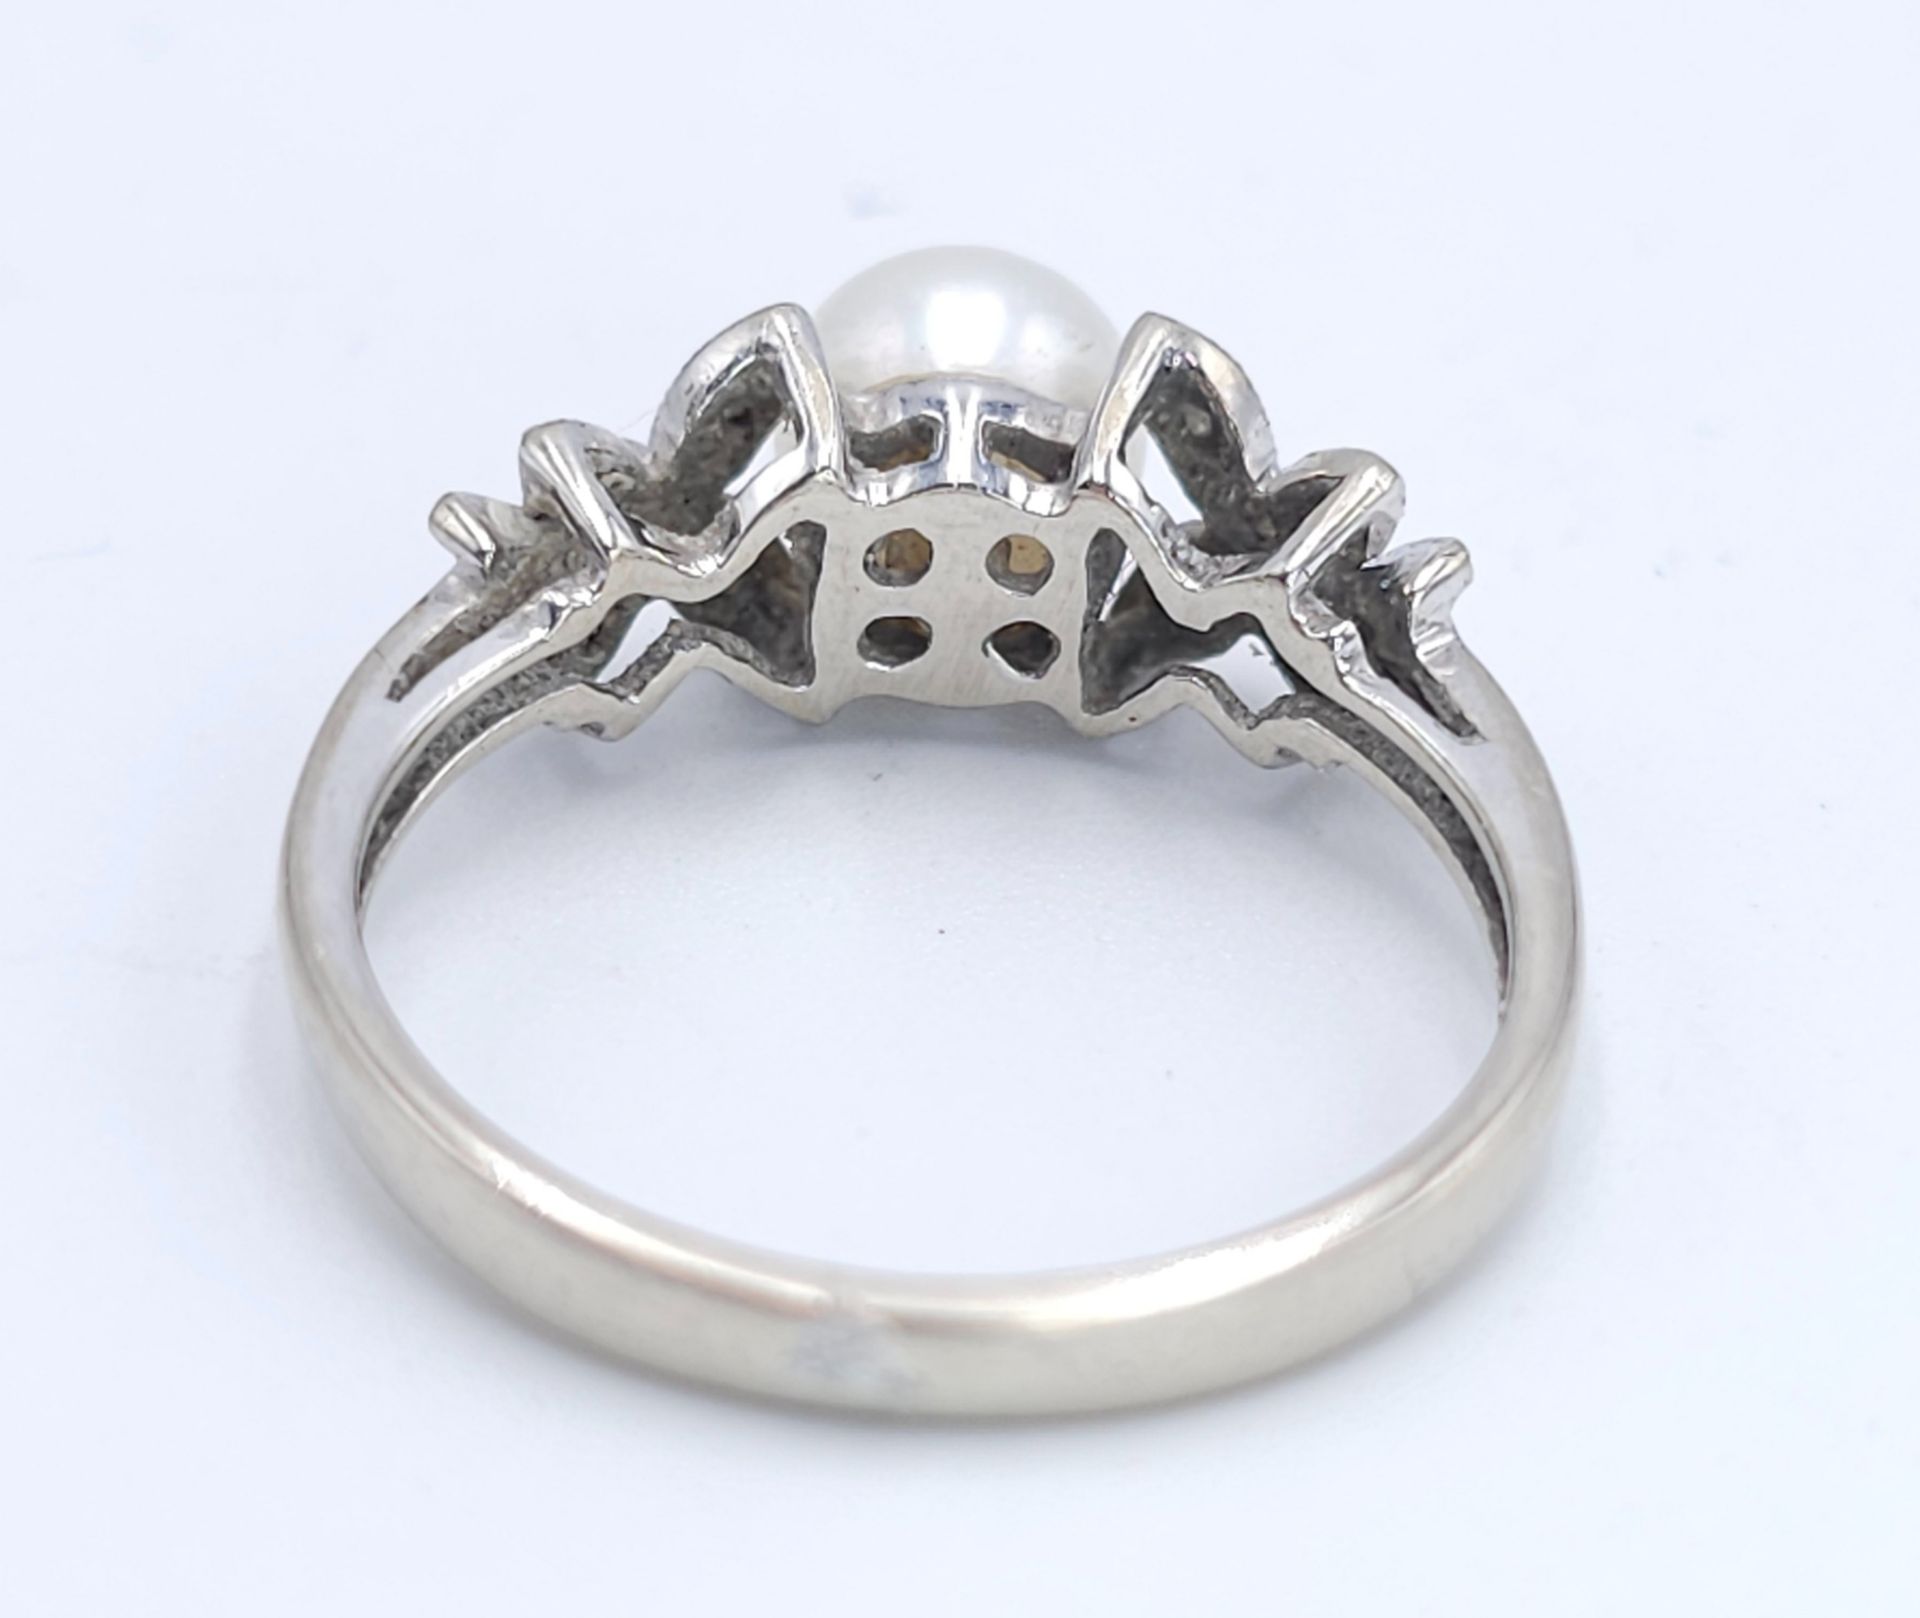 A 14K White Gold, Pearl and Diamond Ring. Central pearl with diamond accents. Size L 1/2. 2.5g total - Image 4 of 6